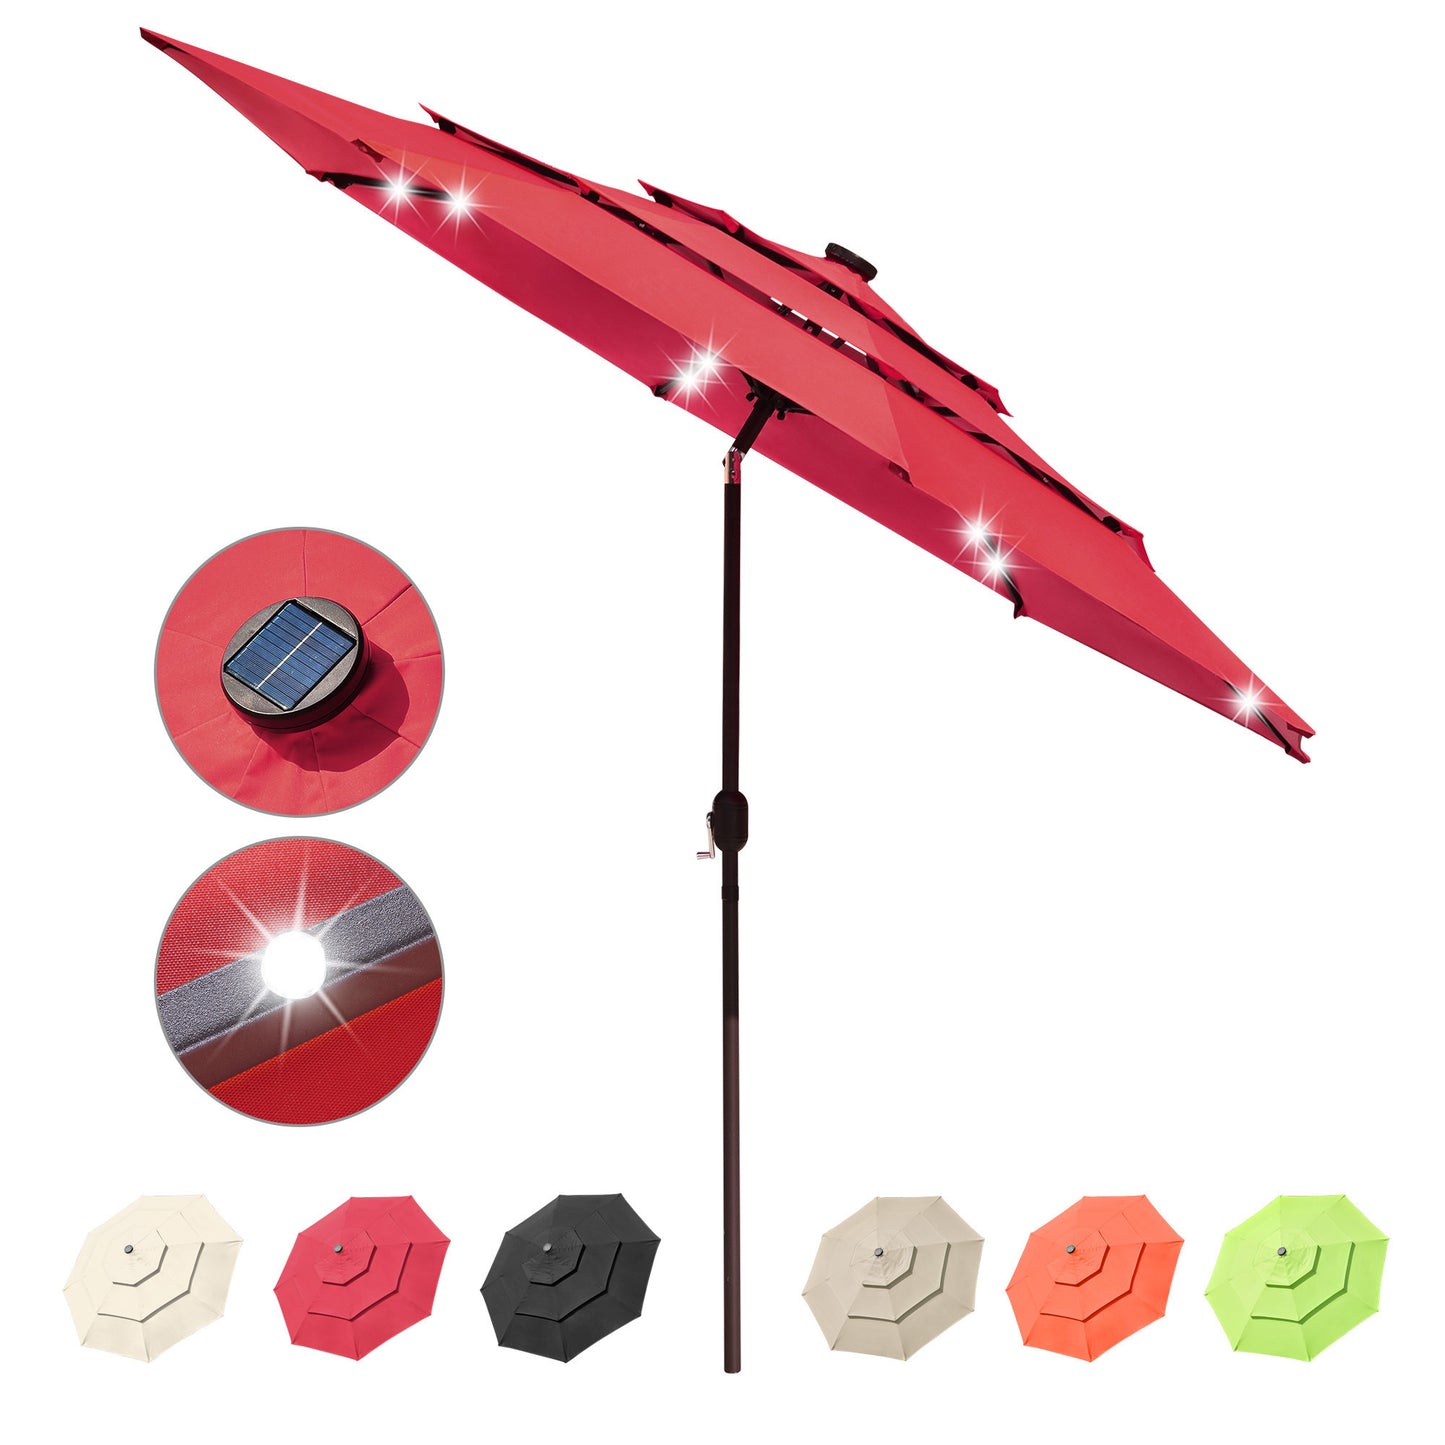 10Ft 3-Tiers 32LEDS Patio Umbrella Red